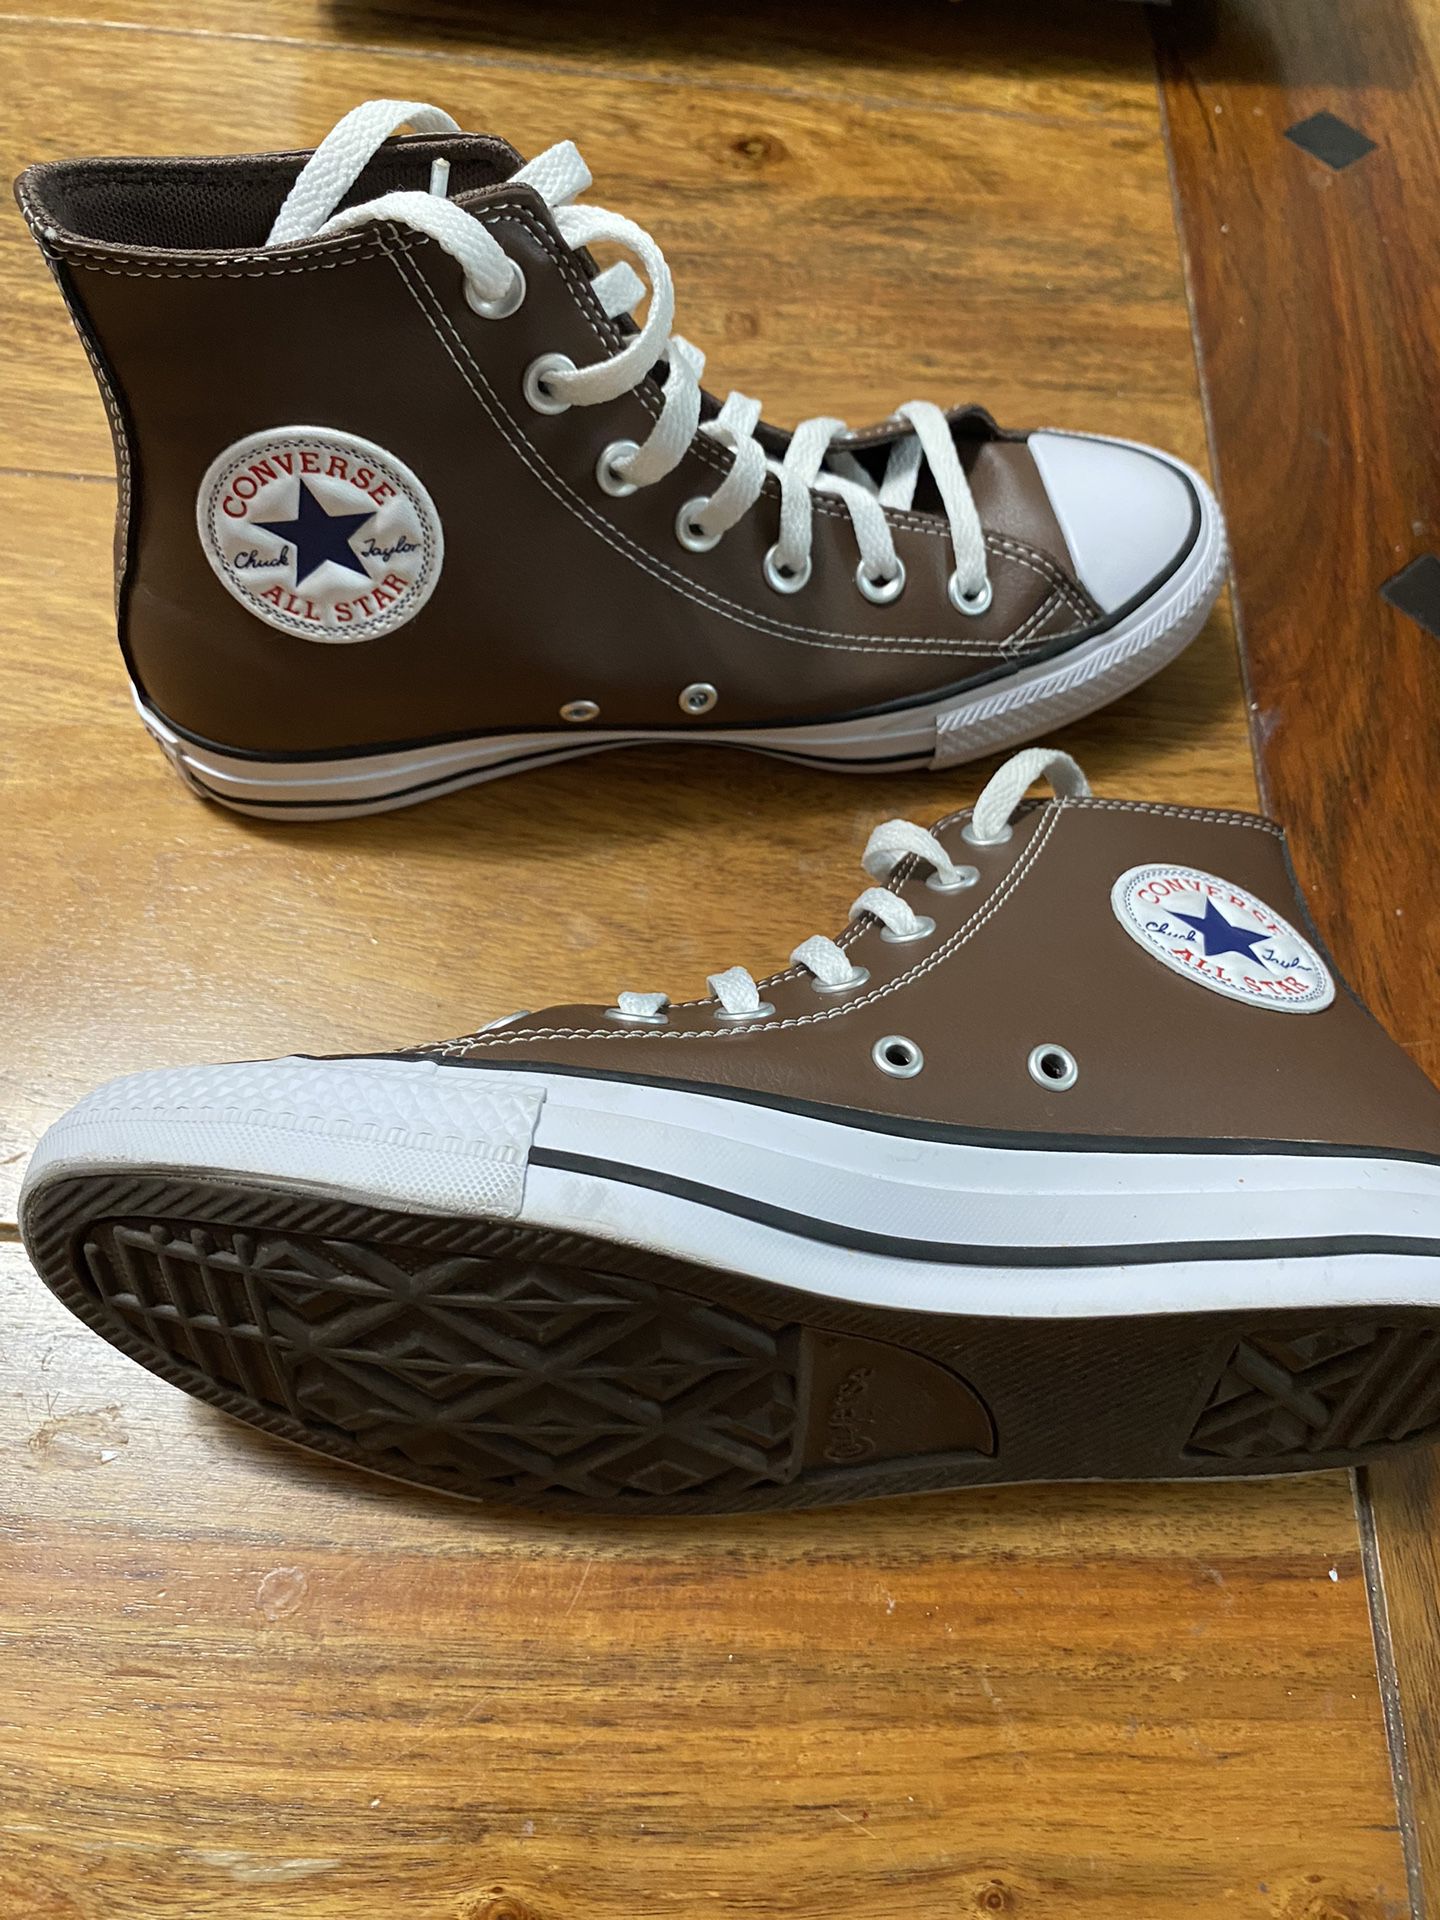 Converse-Brown Leather, M 5.5/W 7.5 for Sale in Tustin, CA - OfferUp